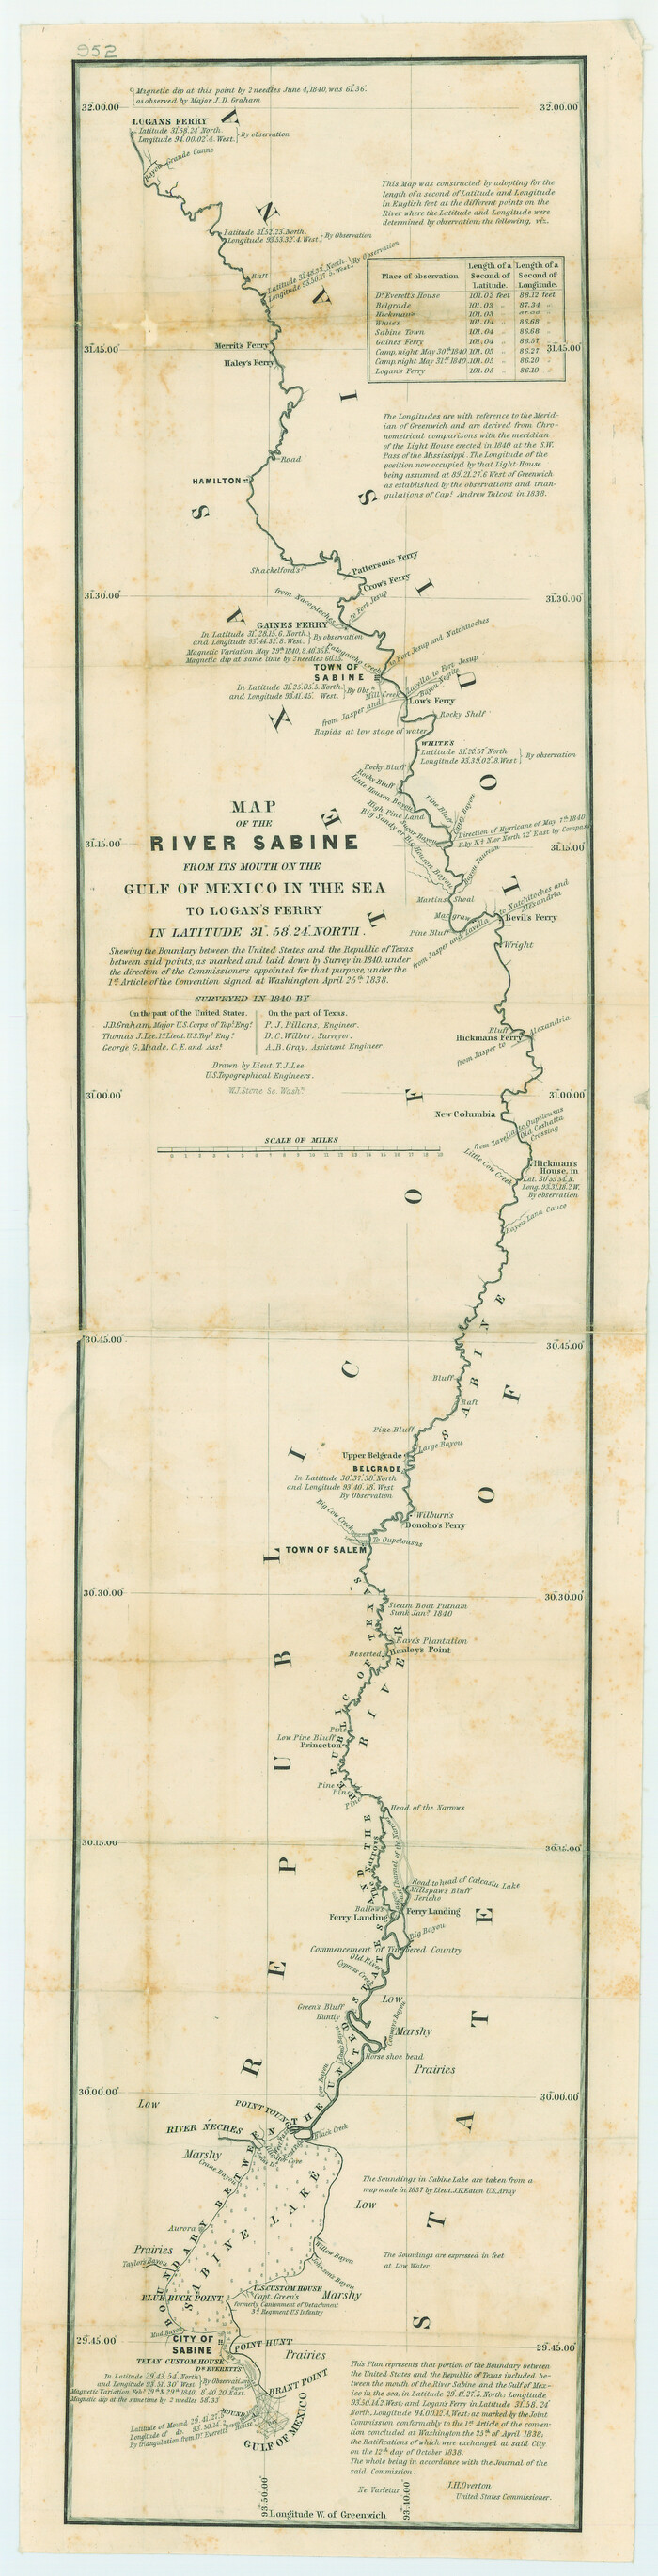 79294, Map of the River Sabine from its Mouth on the Gulf of Mexico in the Sea to Logan's Ferry in Latitude 31° 58' 25" North, Texas State Library and Archives